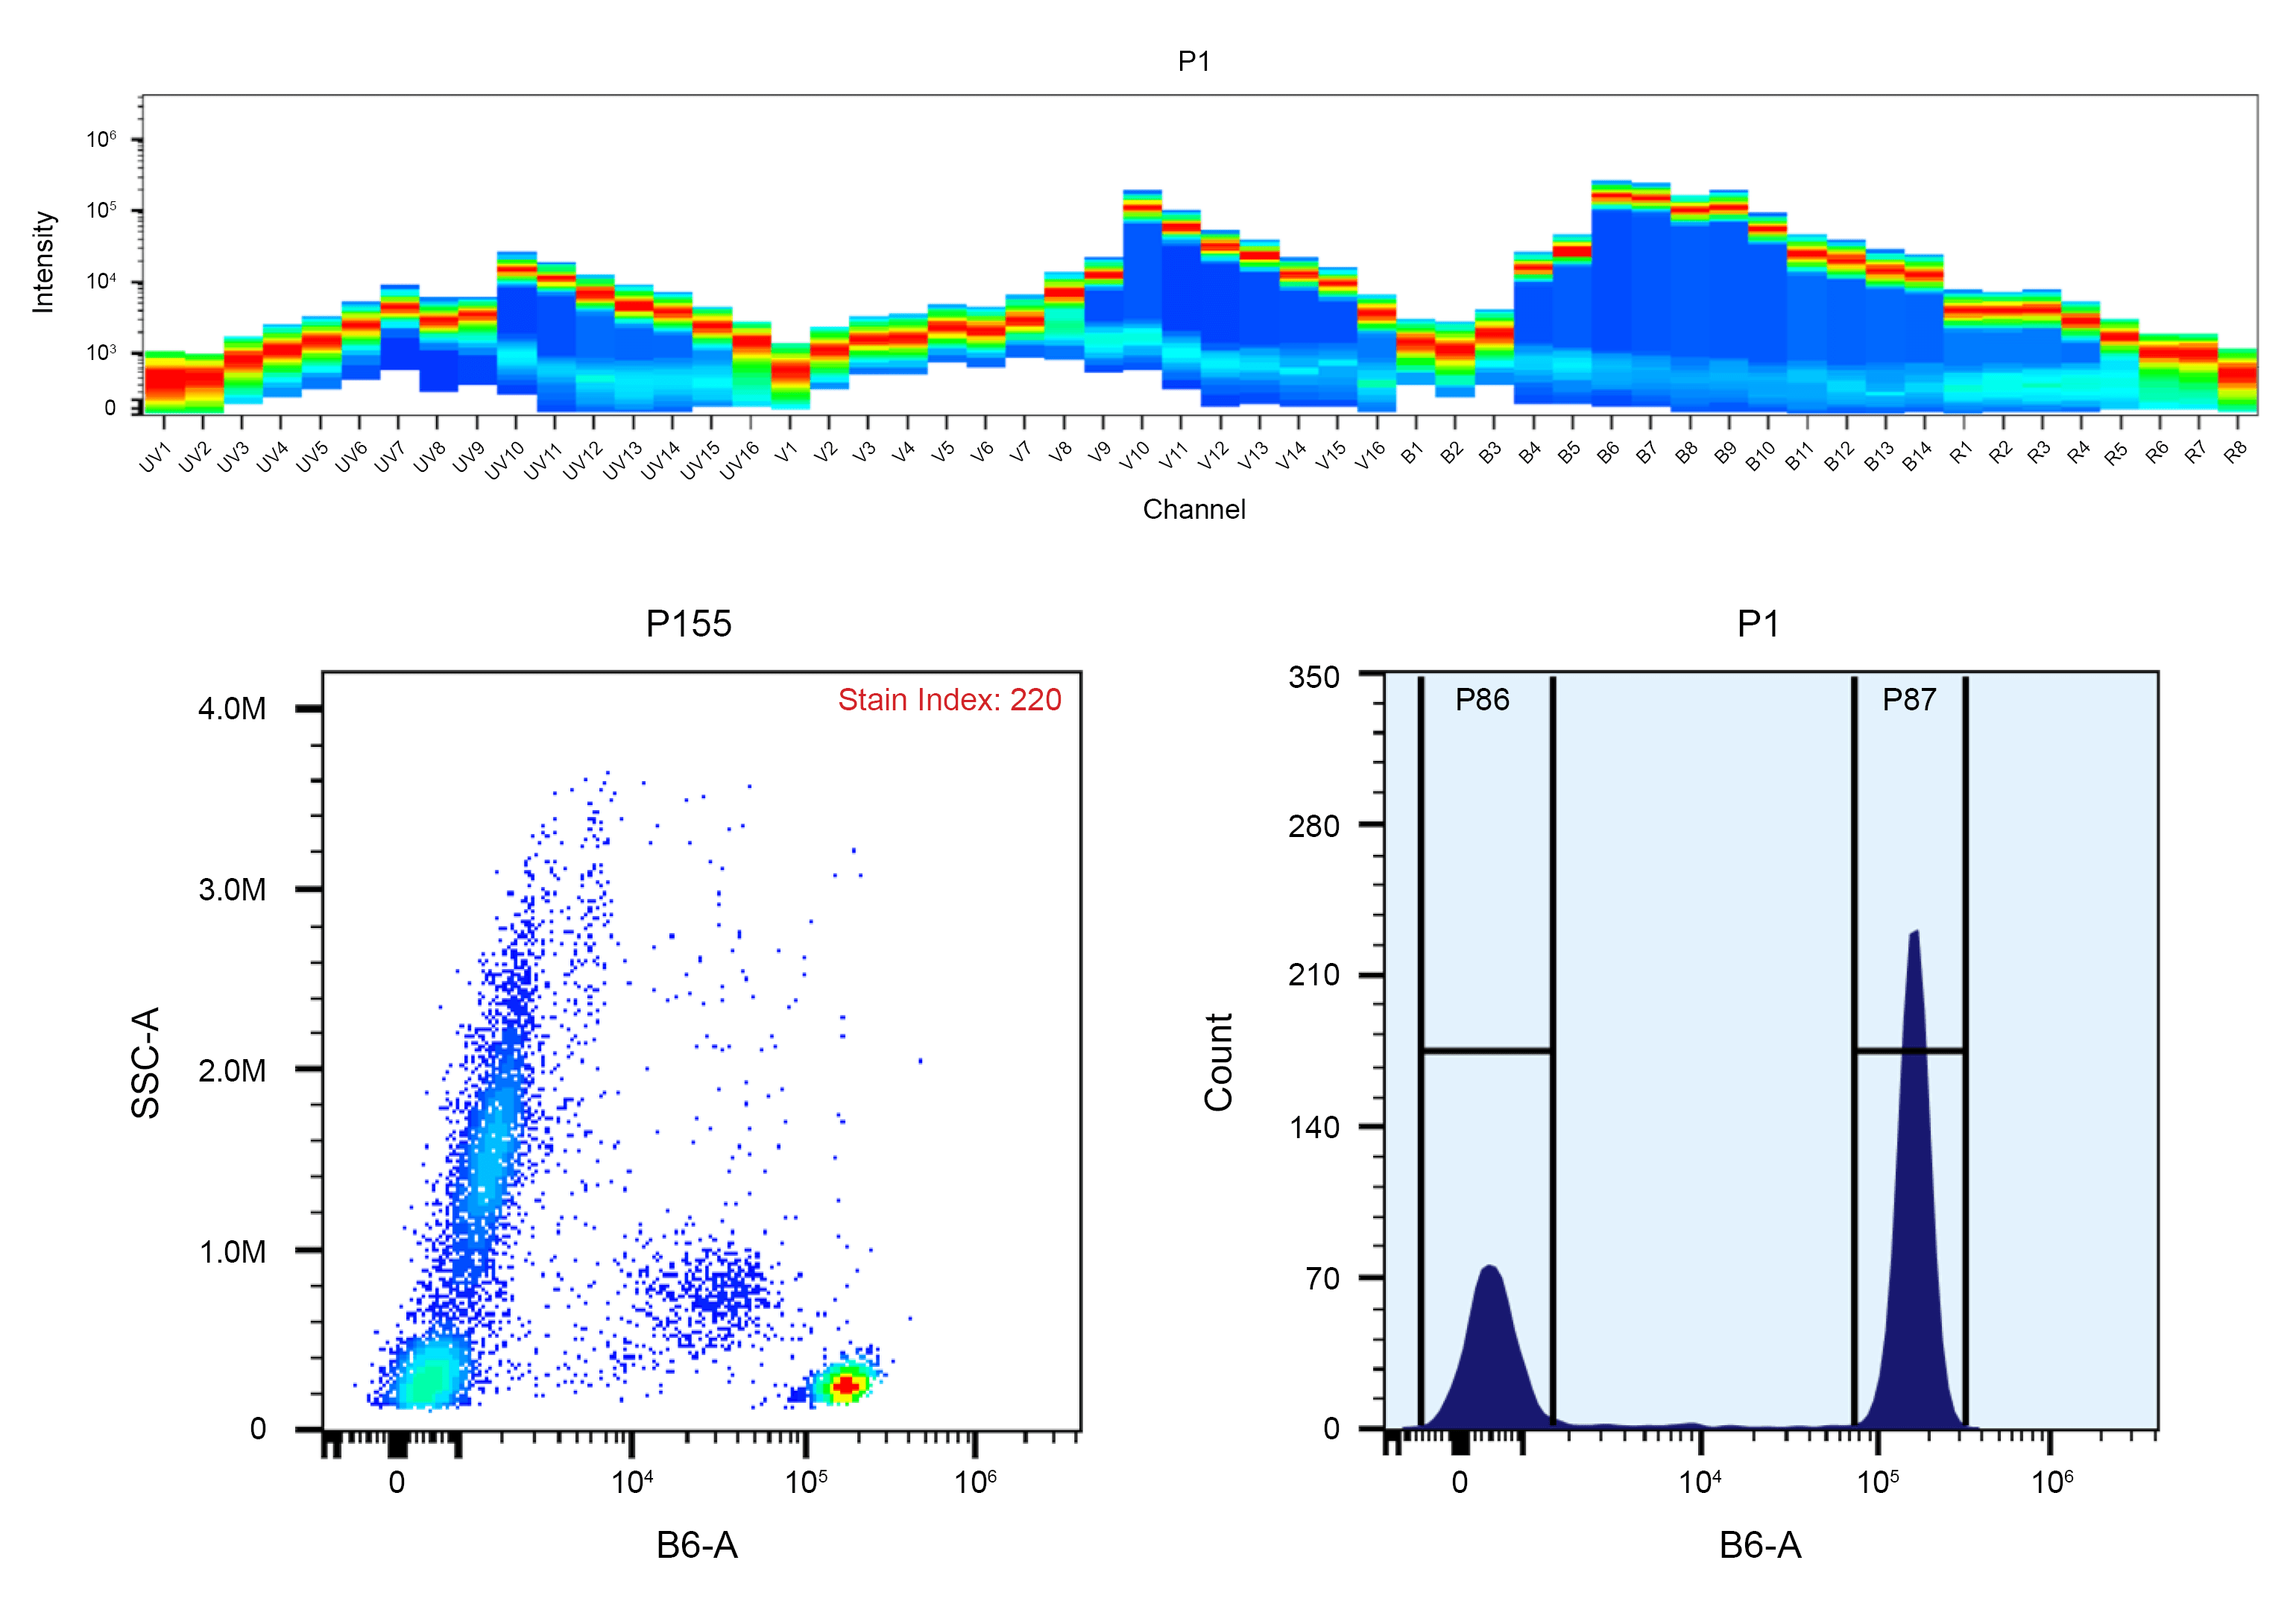 Top) Spectral pattern was generated using a 4-laser spectral cytometer. Spatially offset lasers (355 nm, 405 nm, 488 nm, and 640 nm) were used to create four distinct emission profiles, then, when combined, yielded the overall spectral signature.

Bottom) Flow cytometry analysis of whole blood stained with PE/iFlour® 605 anti-human CD4 *SK3* conjugate. The fluorescence signal was monitored using an Aurora spectral flow cytometer in the B6-A channel.
